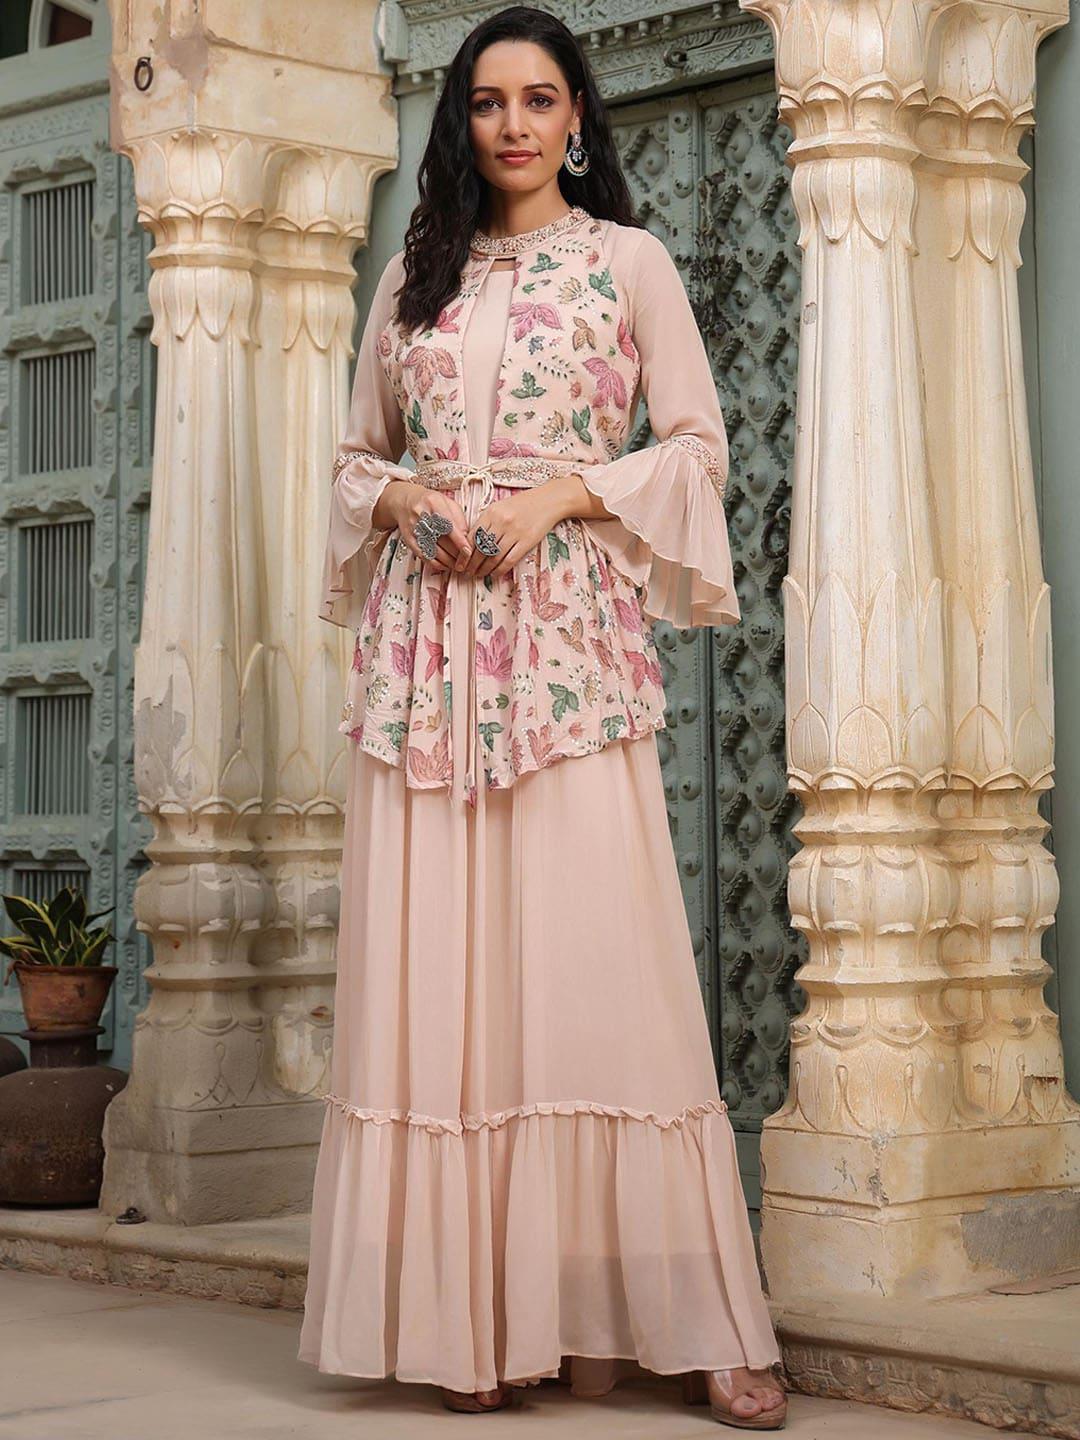 scakhi women cream-coloured floral printed flared sleeves georgette ethnic dress